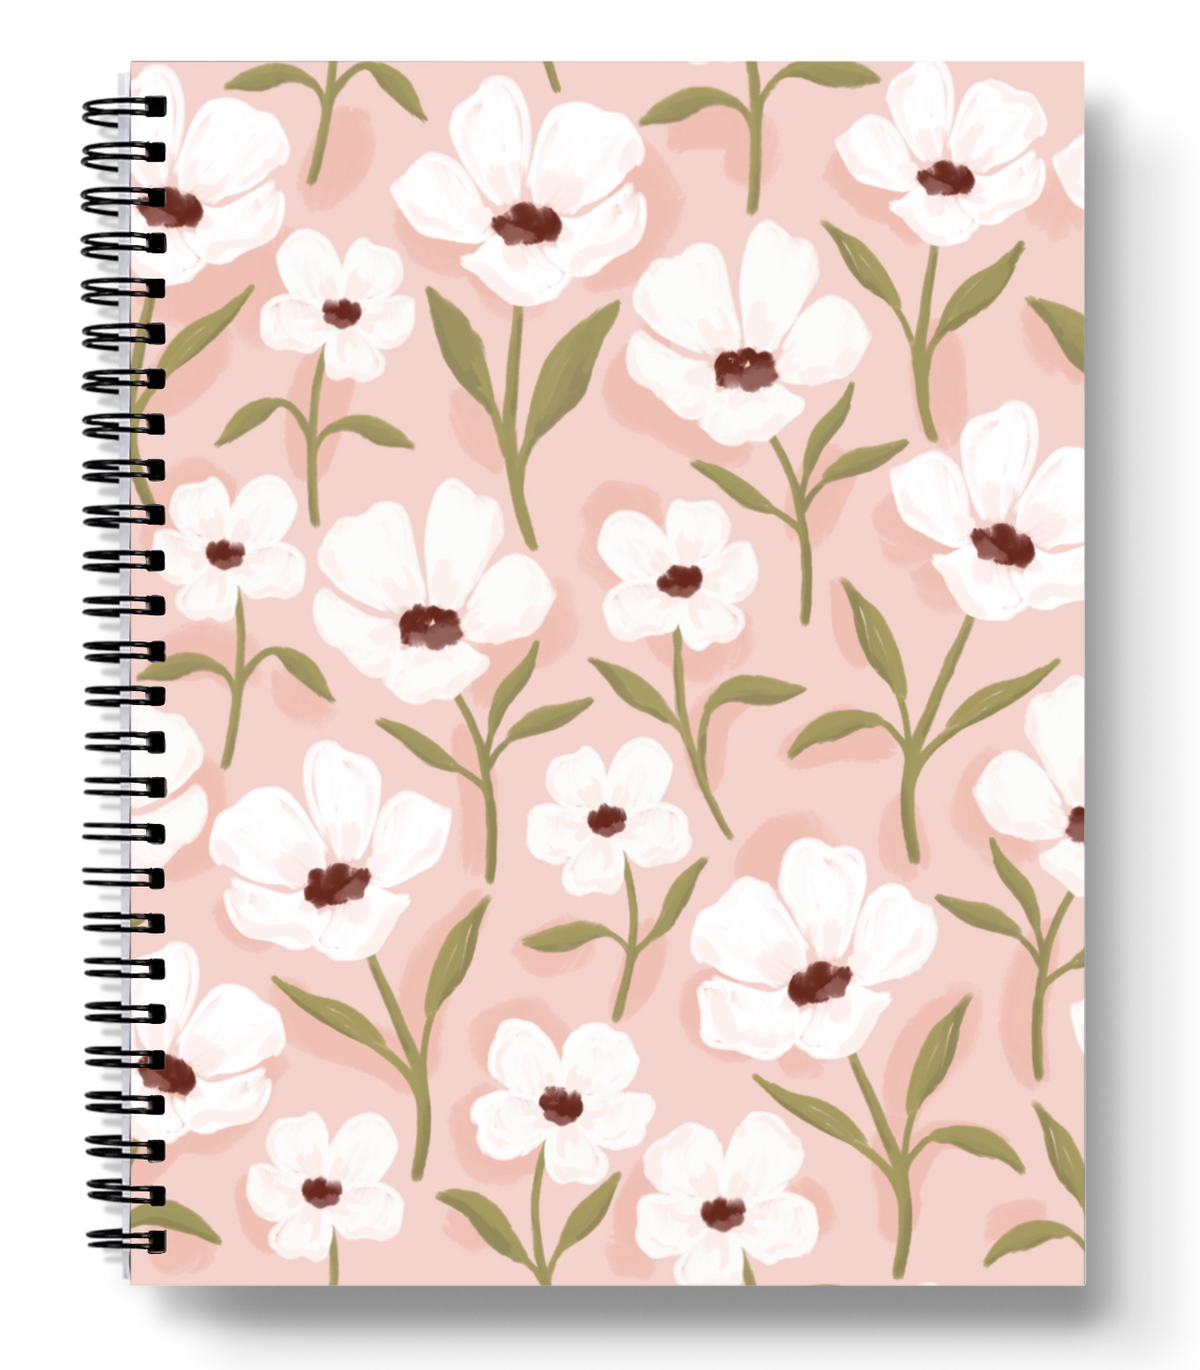 White Anemone Spiral Lined Notebook 8.5x11in. Elyse Breanne Design--Lemons and Limes Boutique